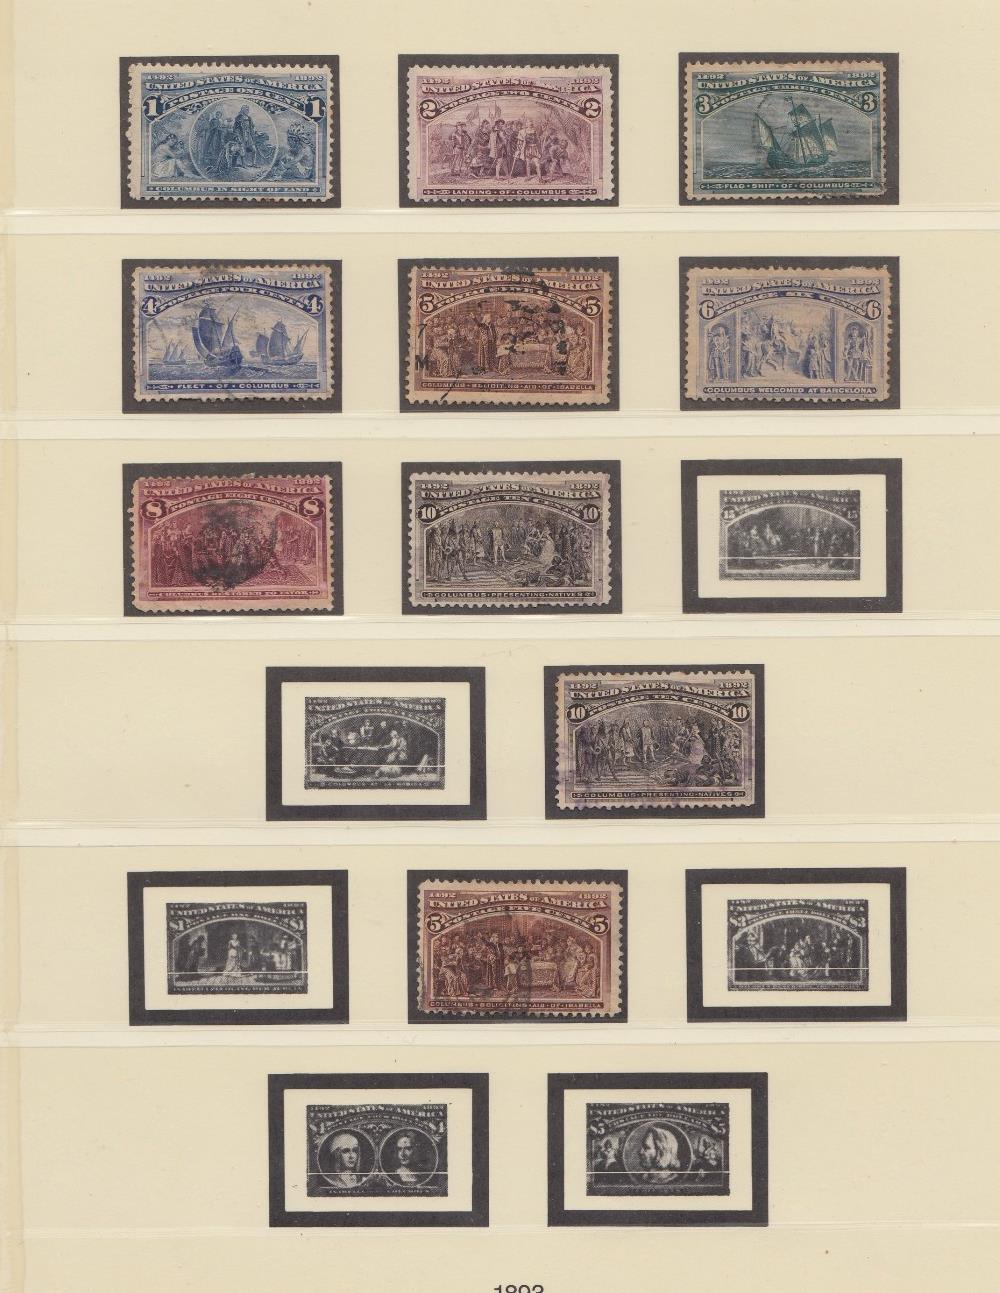 STAMPS USA Lindner hinge-less printed album with issues from 1847 to 1936, mostly used issues, - Image 5 of 8